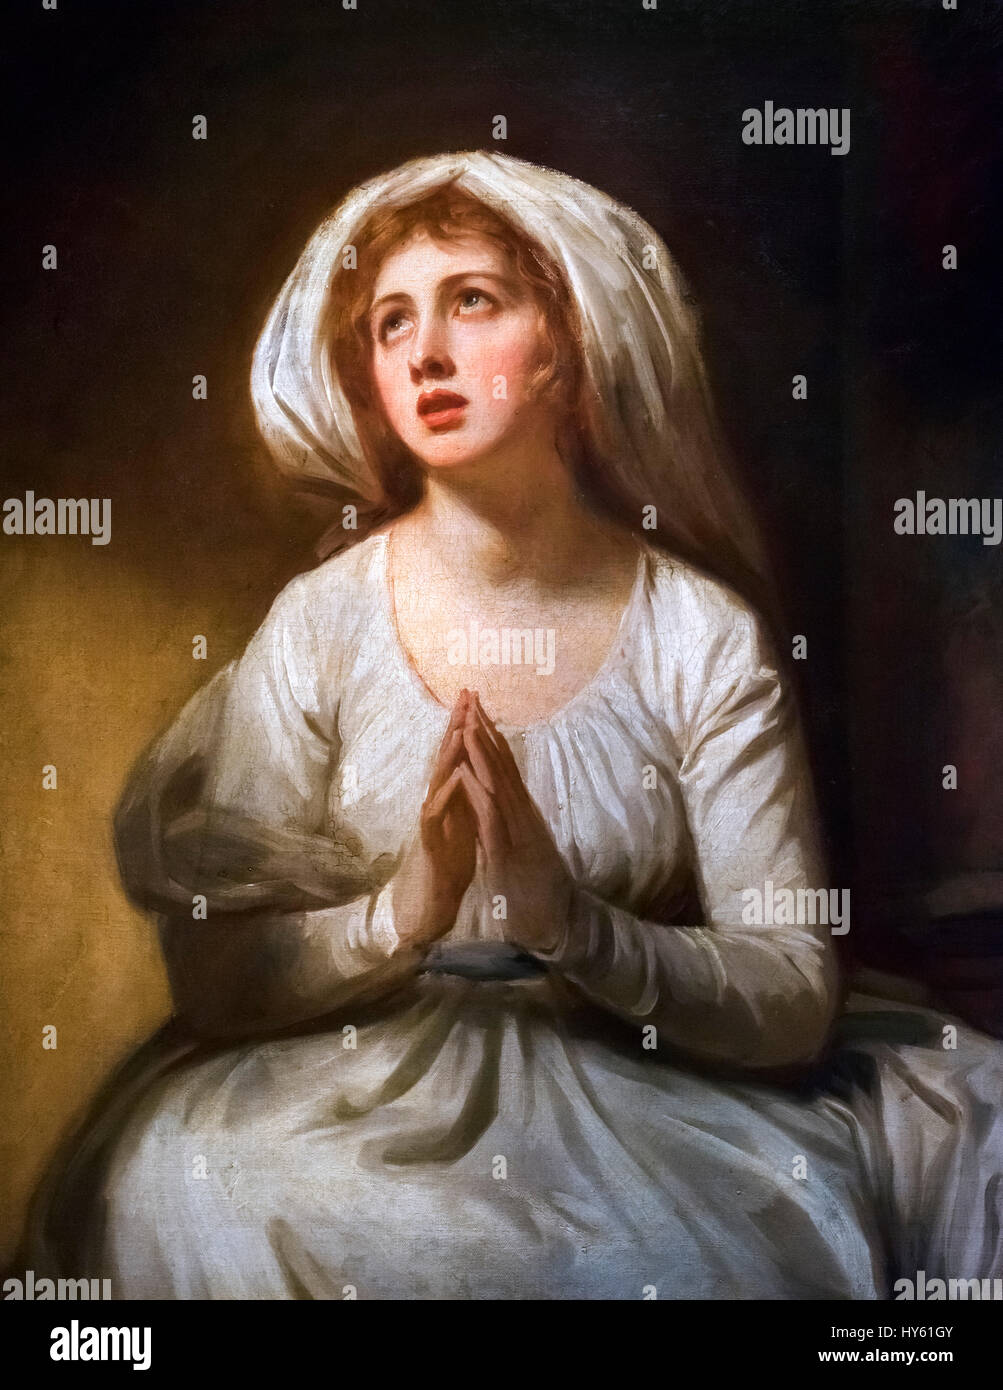 Lady Hamilton at Prayer by George Romney, oil on canvas, c.1782-86. Portrait of Emma Hamilton (1765-1815), the mistress of Lord Nelson and the muse of George Romney. Stock Photo